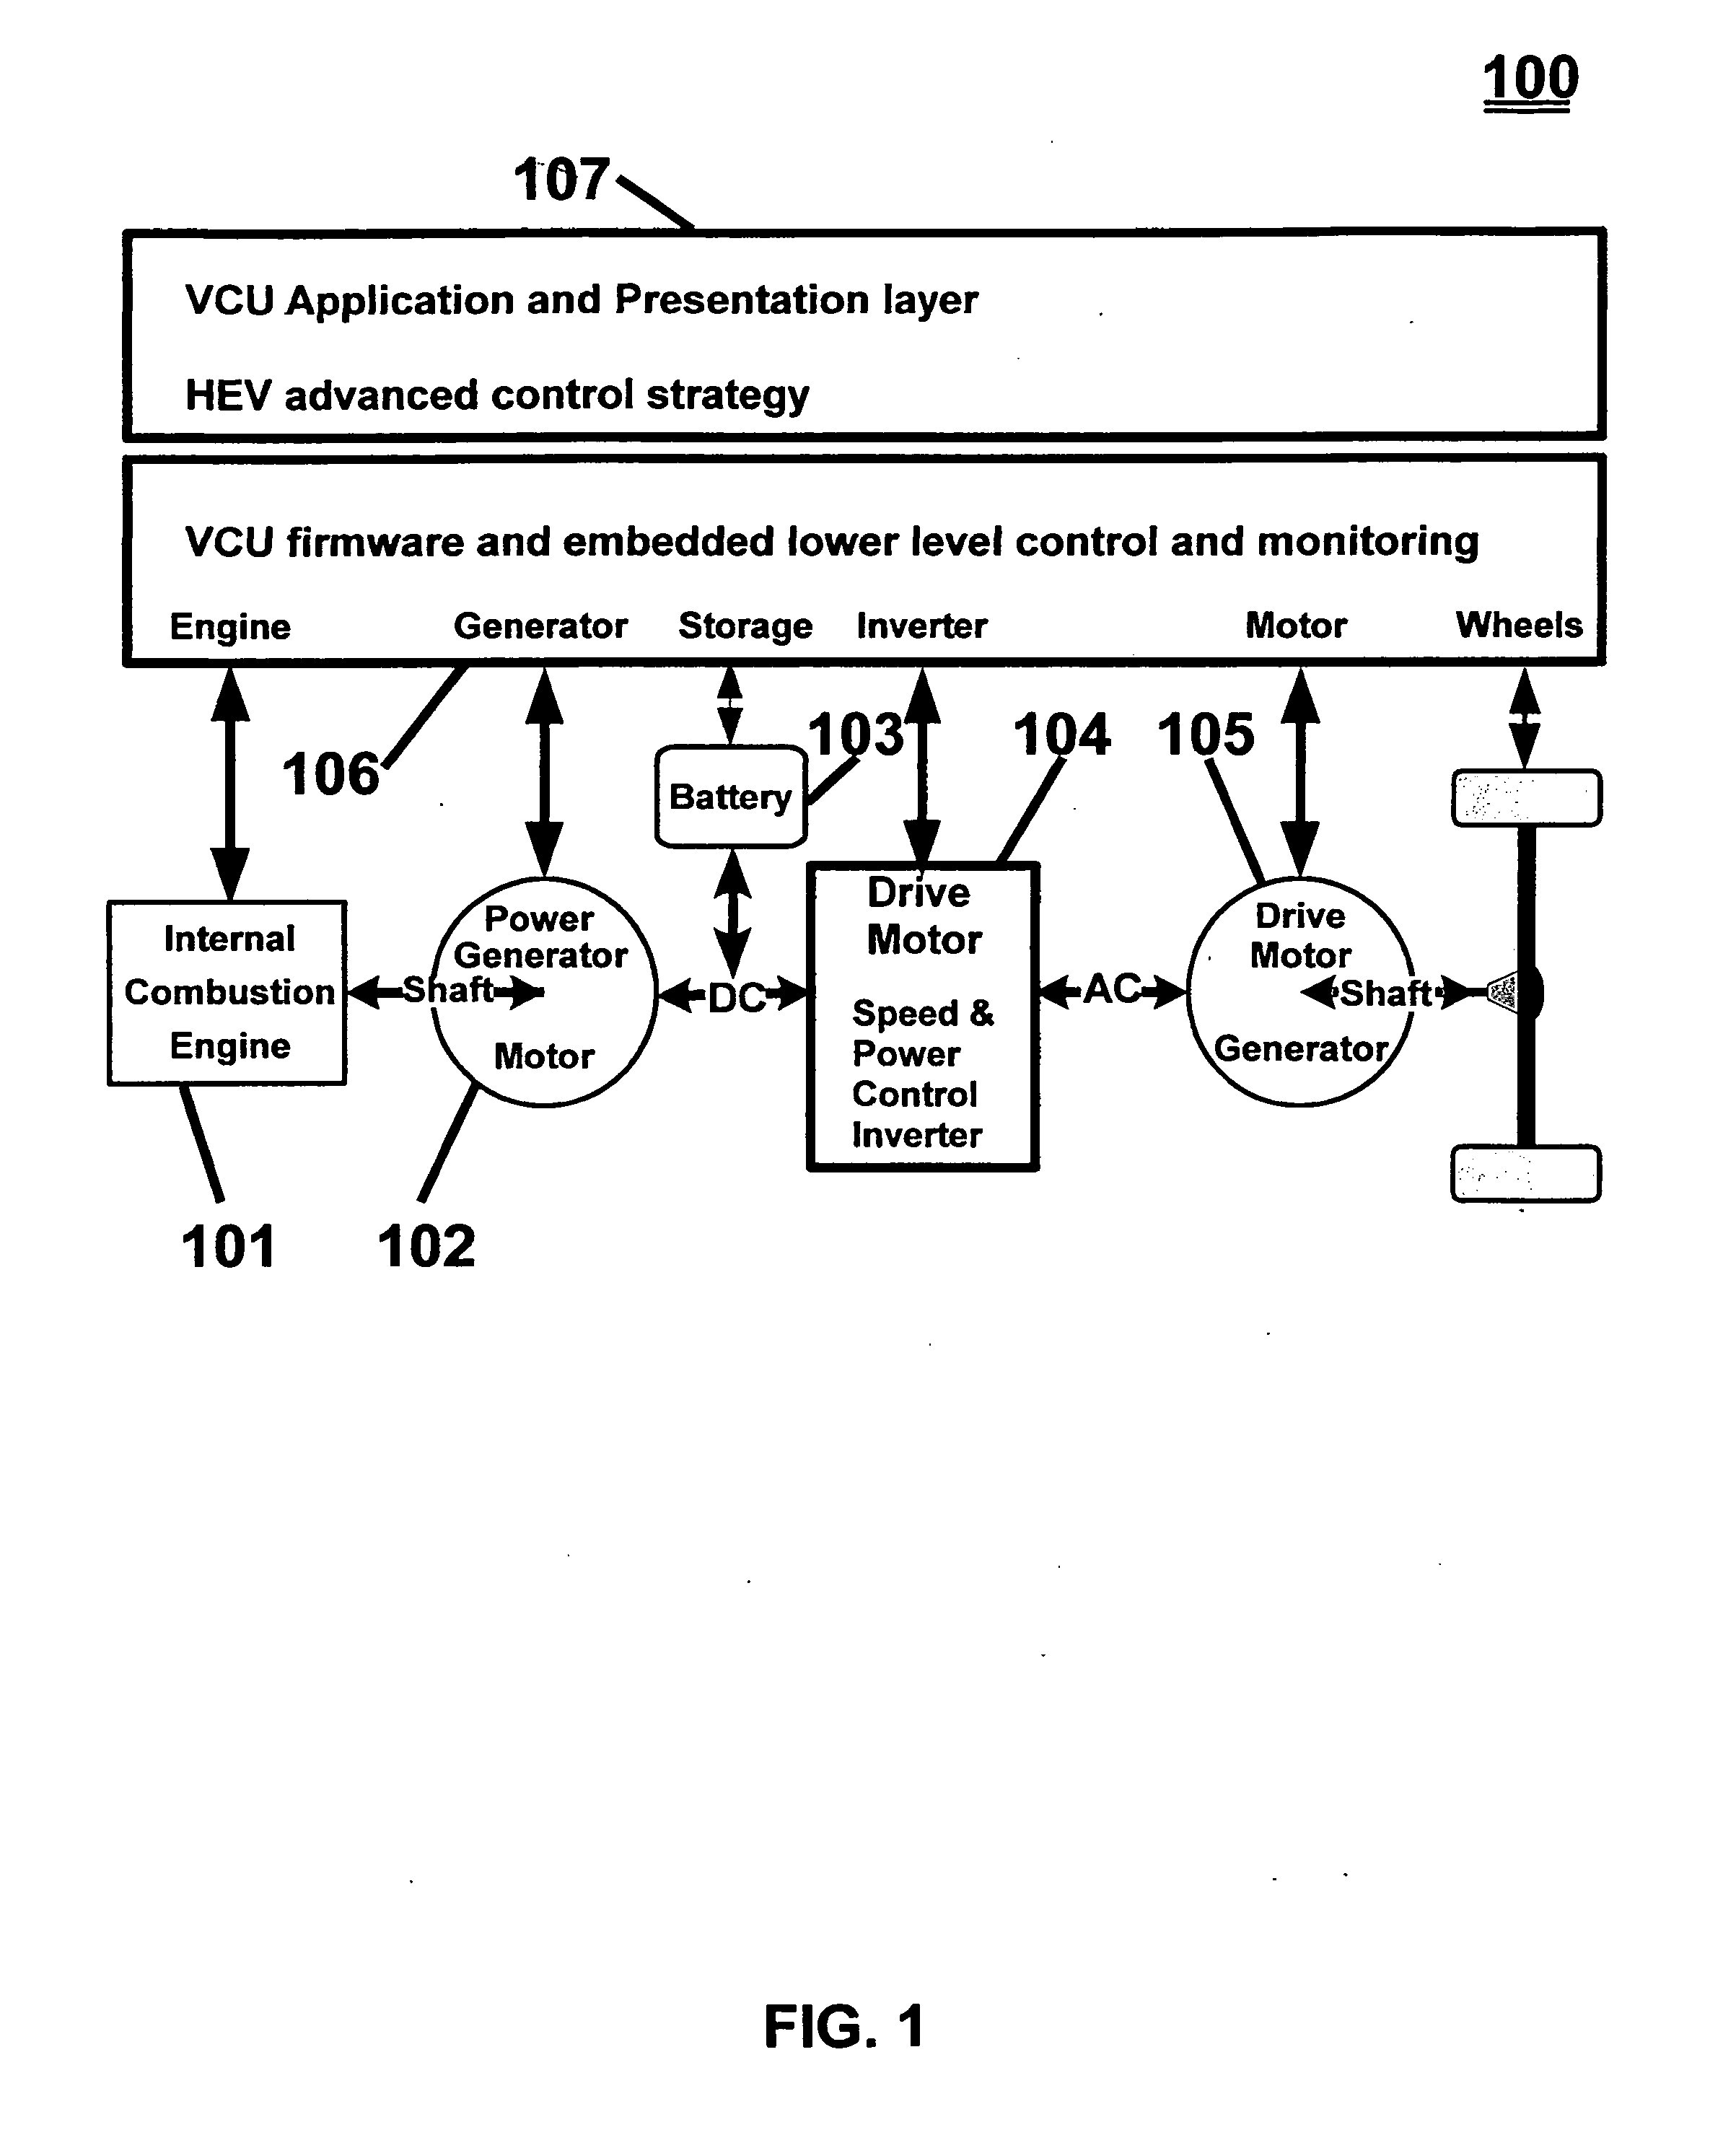 Method for a vehicle control unit (VCU) for control of a drive motor section of a two electric motor tandem drive system